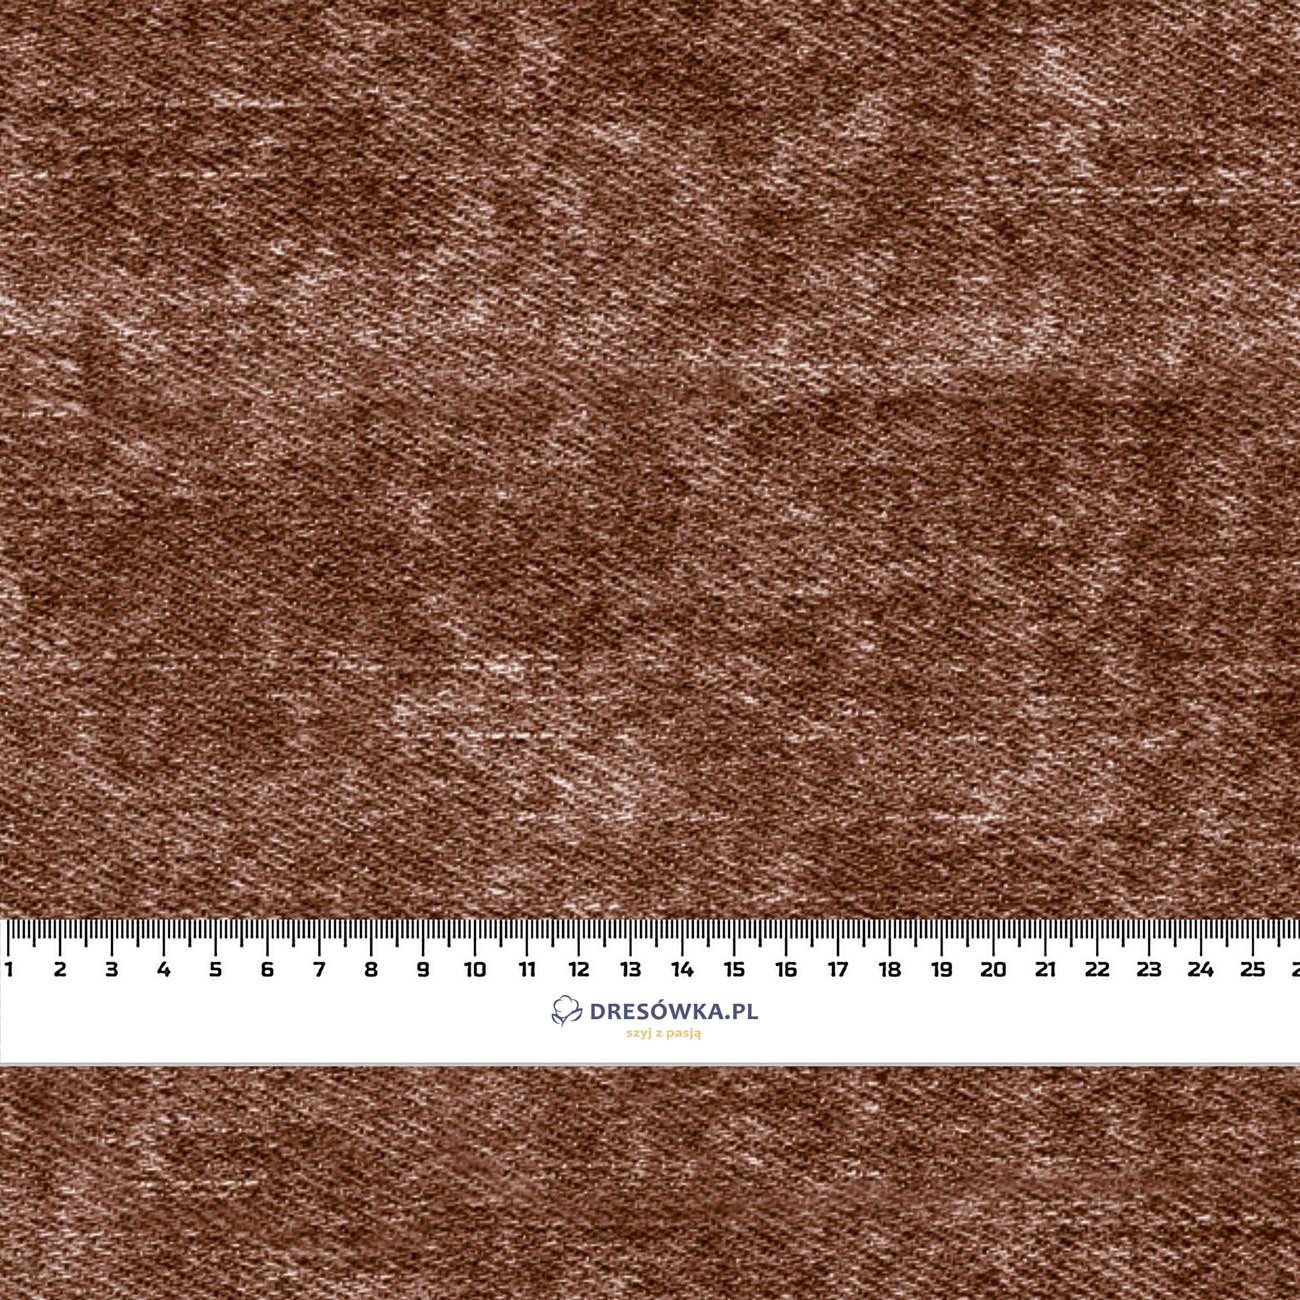 VINTAGE LOOK JEANS (brown) - Cotton woven fabric